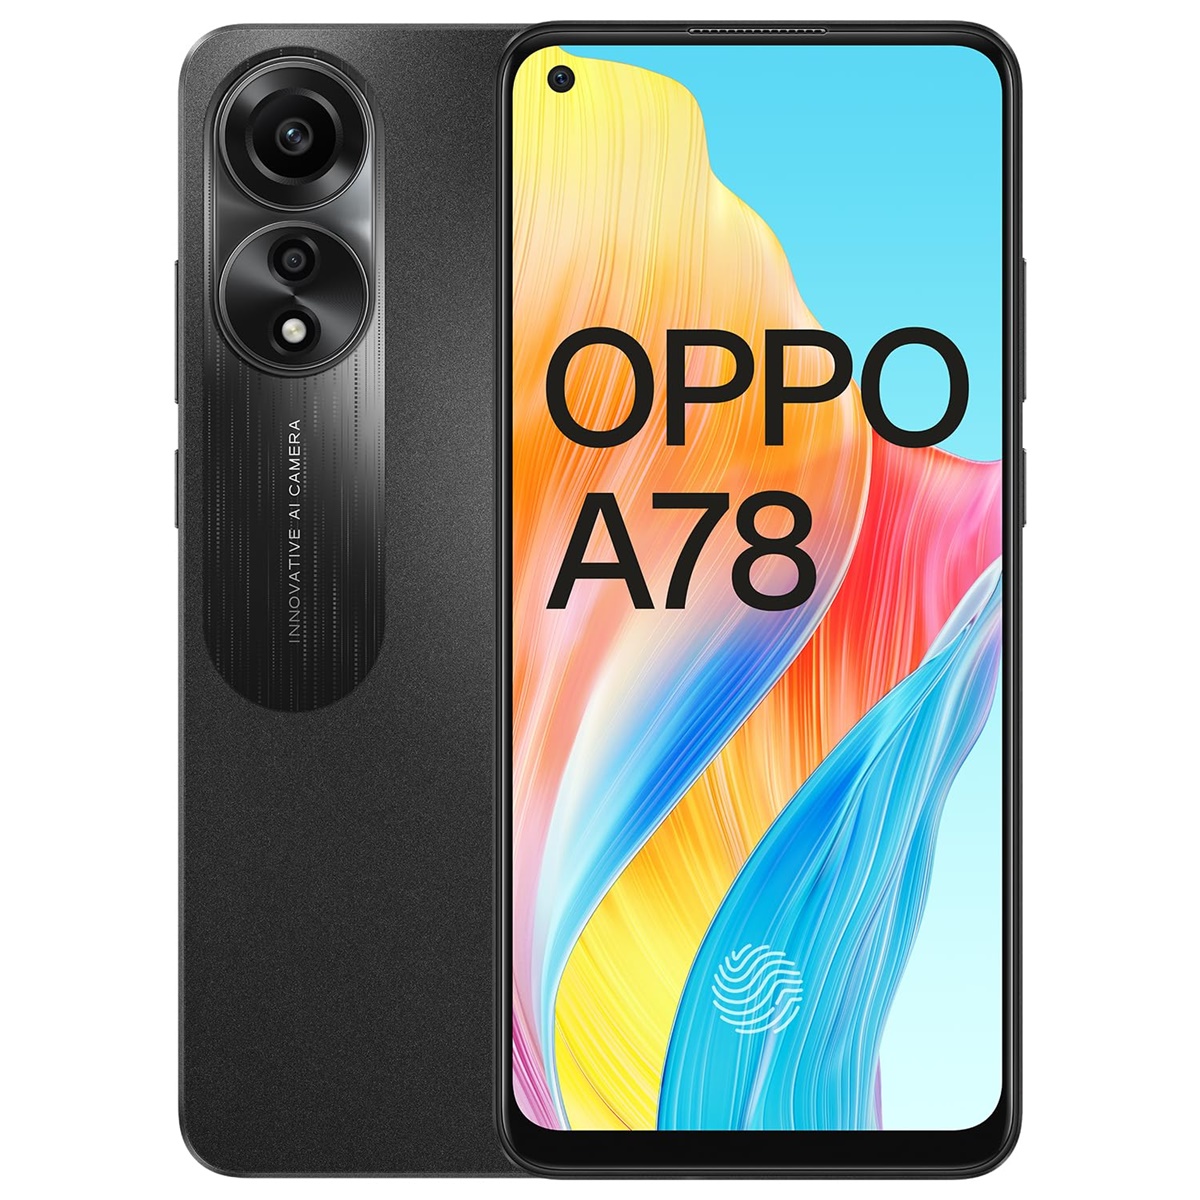 Oppo A78 Released 2023, January 07, 188g, 8mm thickness, Android 12, ColorOS 13, 128GB storage, microSDXC, 6.56"720x1612 pixels, 50MP1080p, 4/8GB RAMDimensity 700, 5000mAh33W